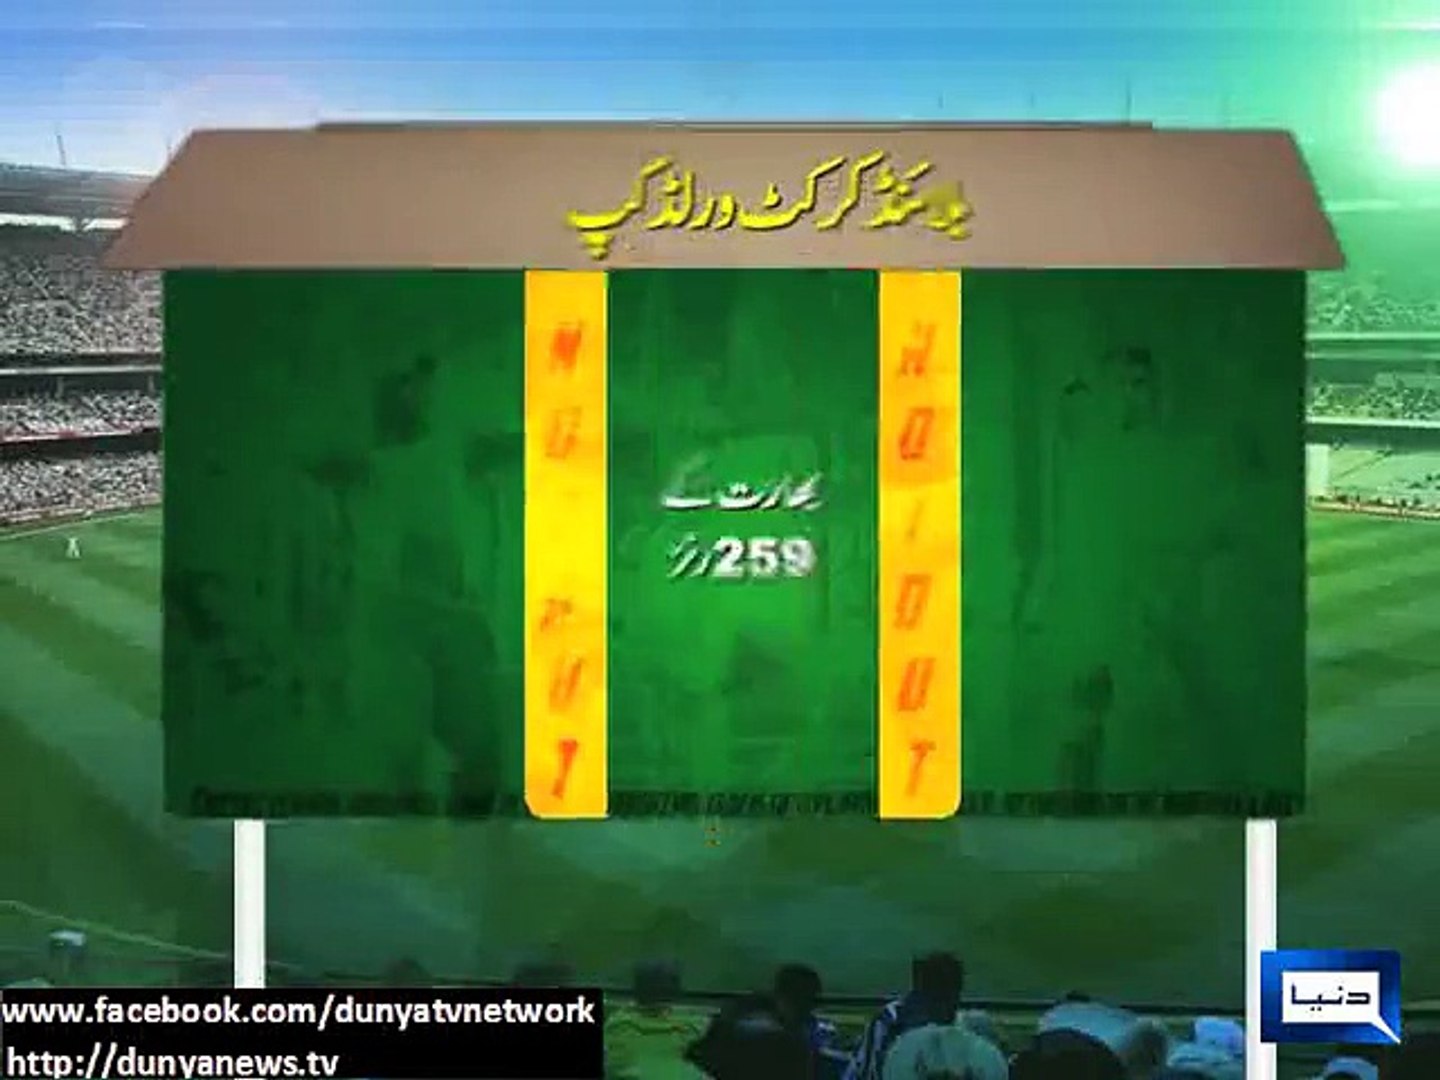 Dunya News - Pakistan beats India by 7 wickets in first match of blind cricket world cup